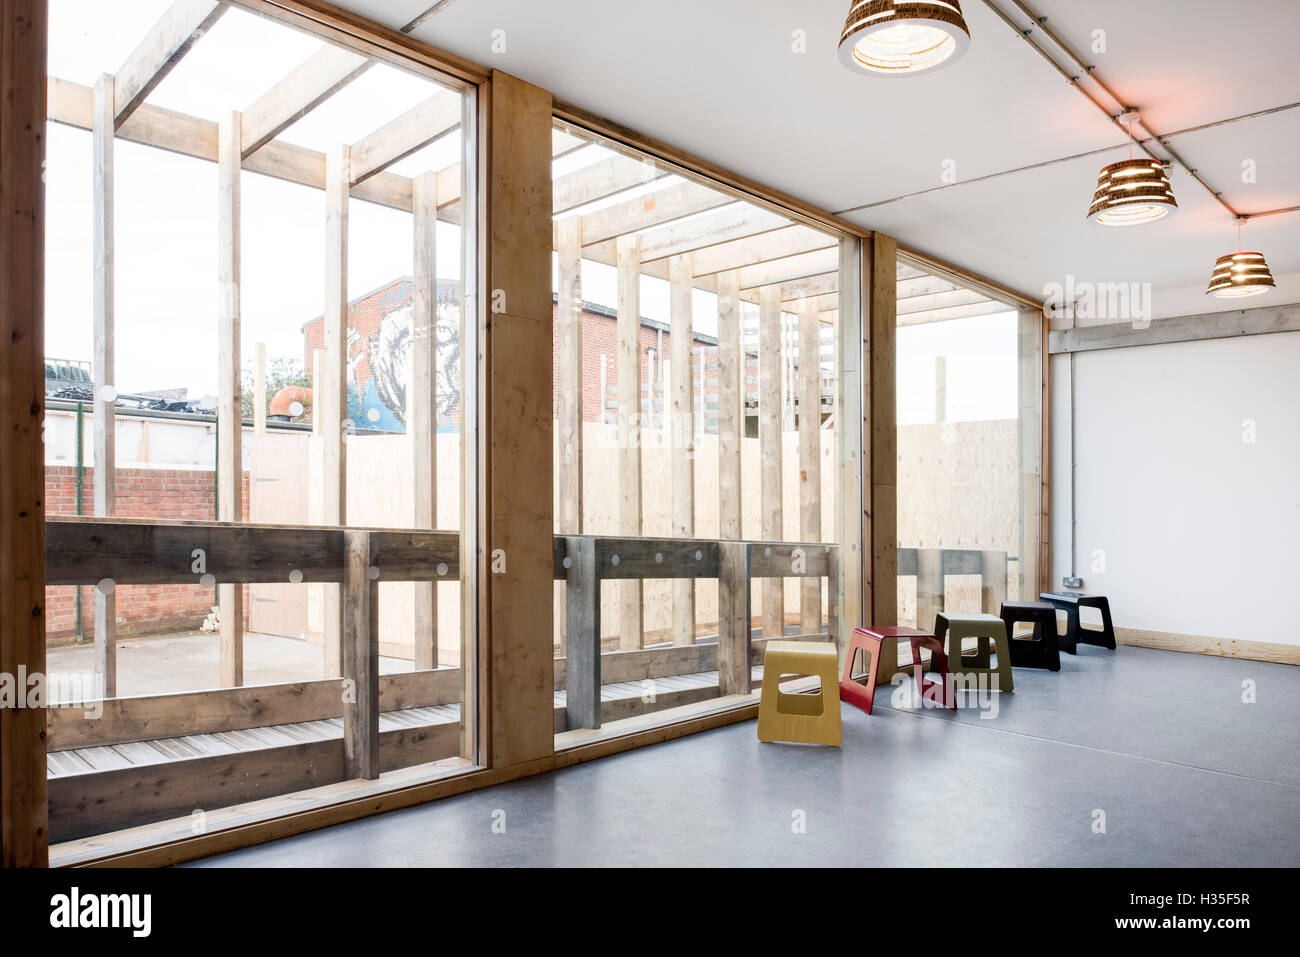 Interior view of hub 67, a temporary community centre in Hackney Wick, London, UK. Stock Photo